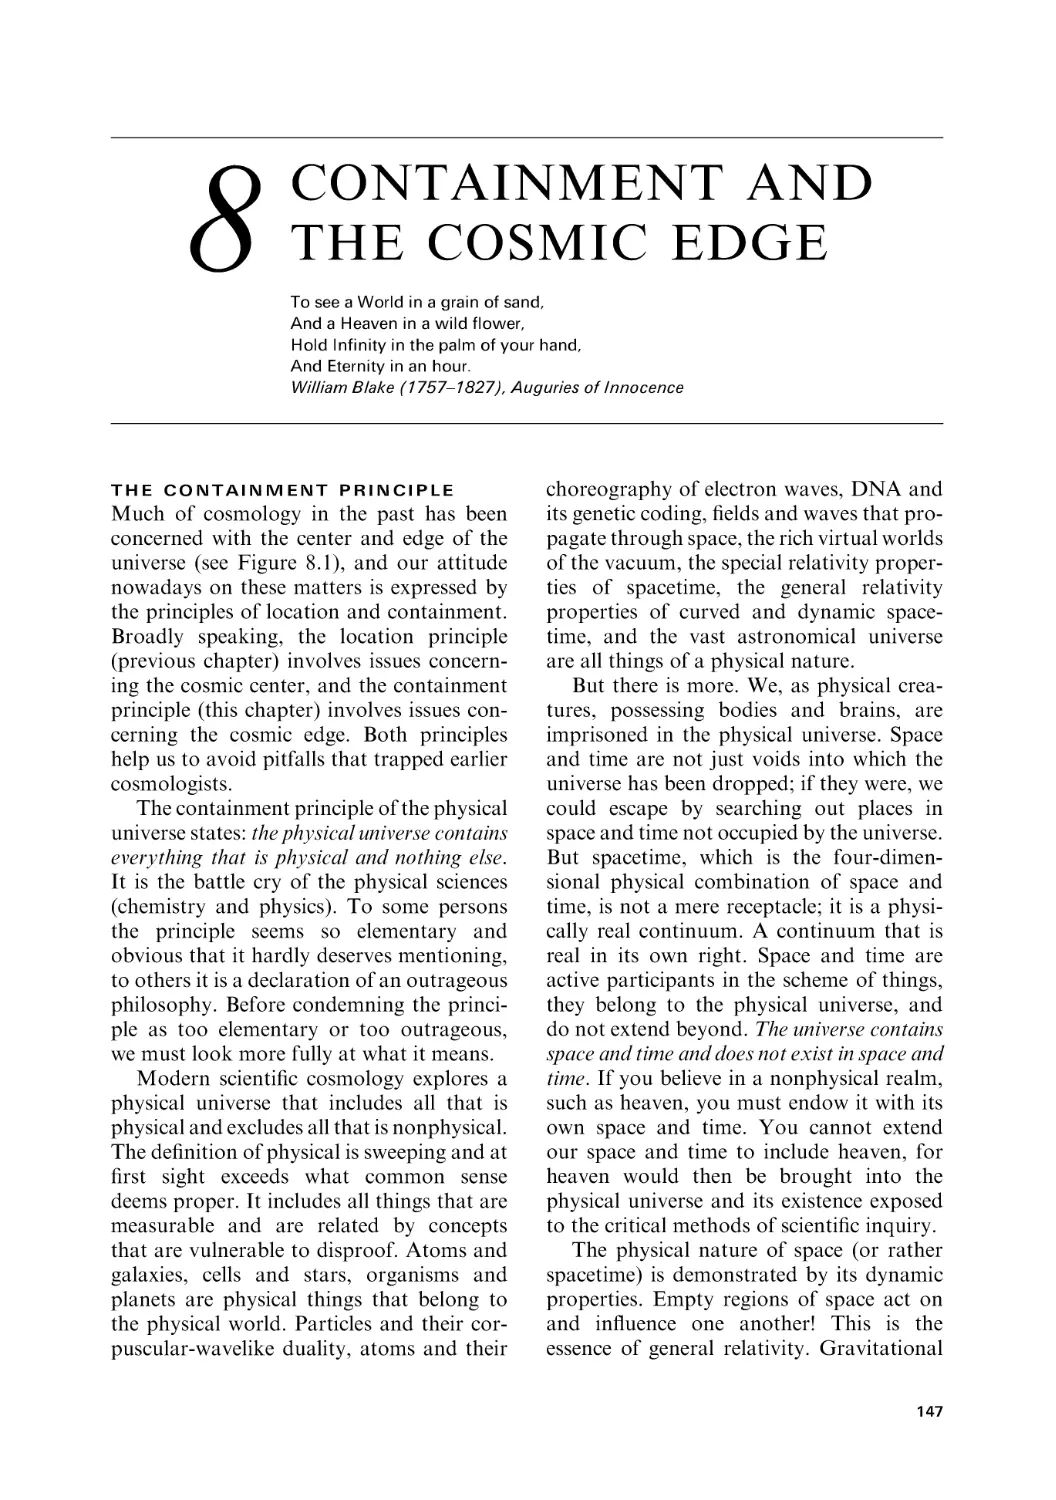 8 Containment and the cosmic edge